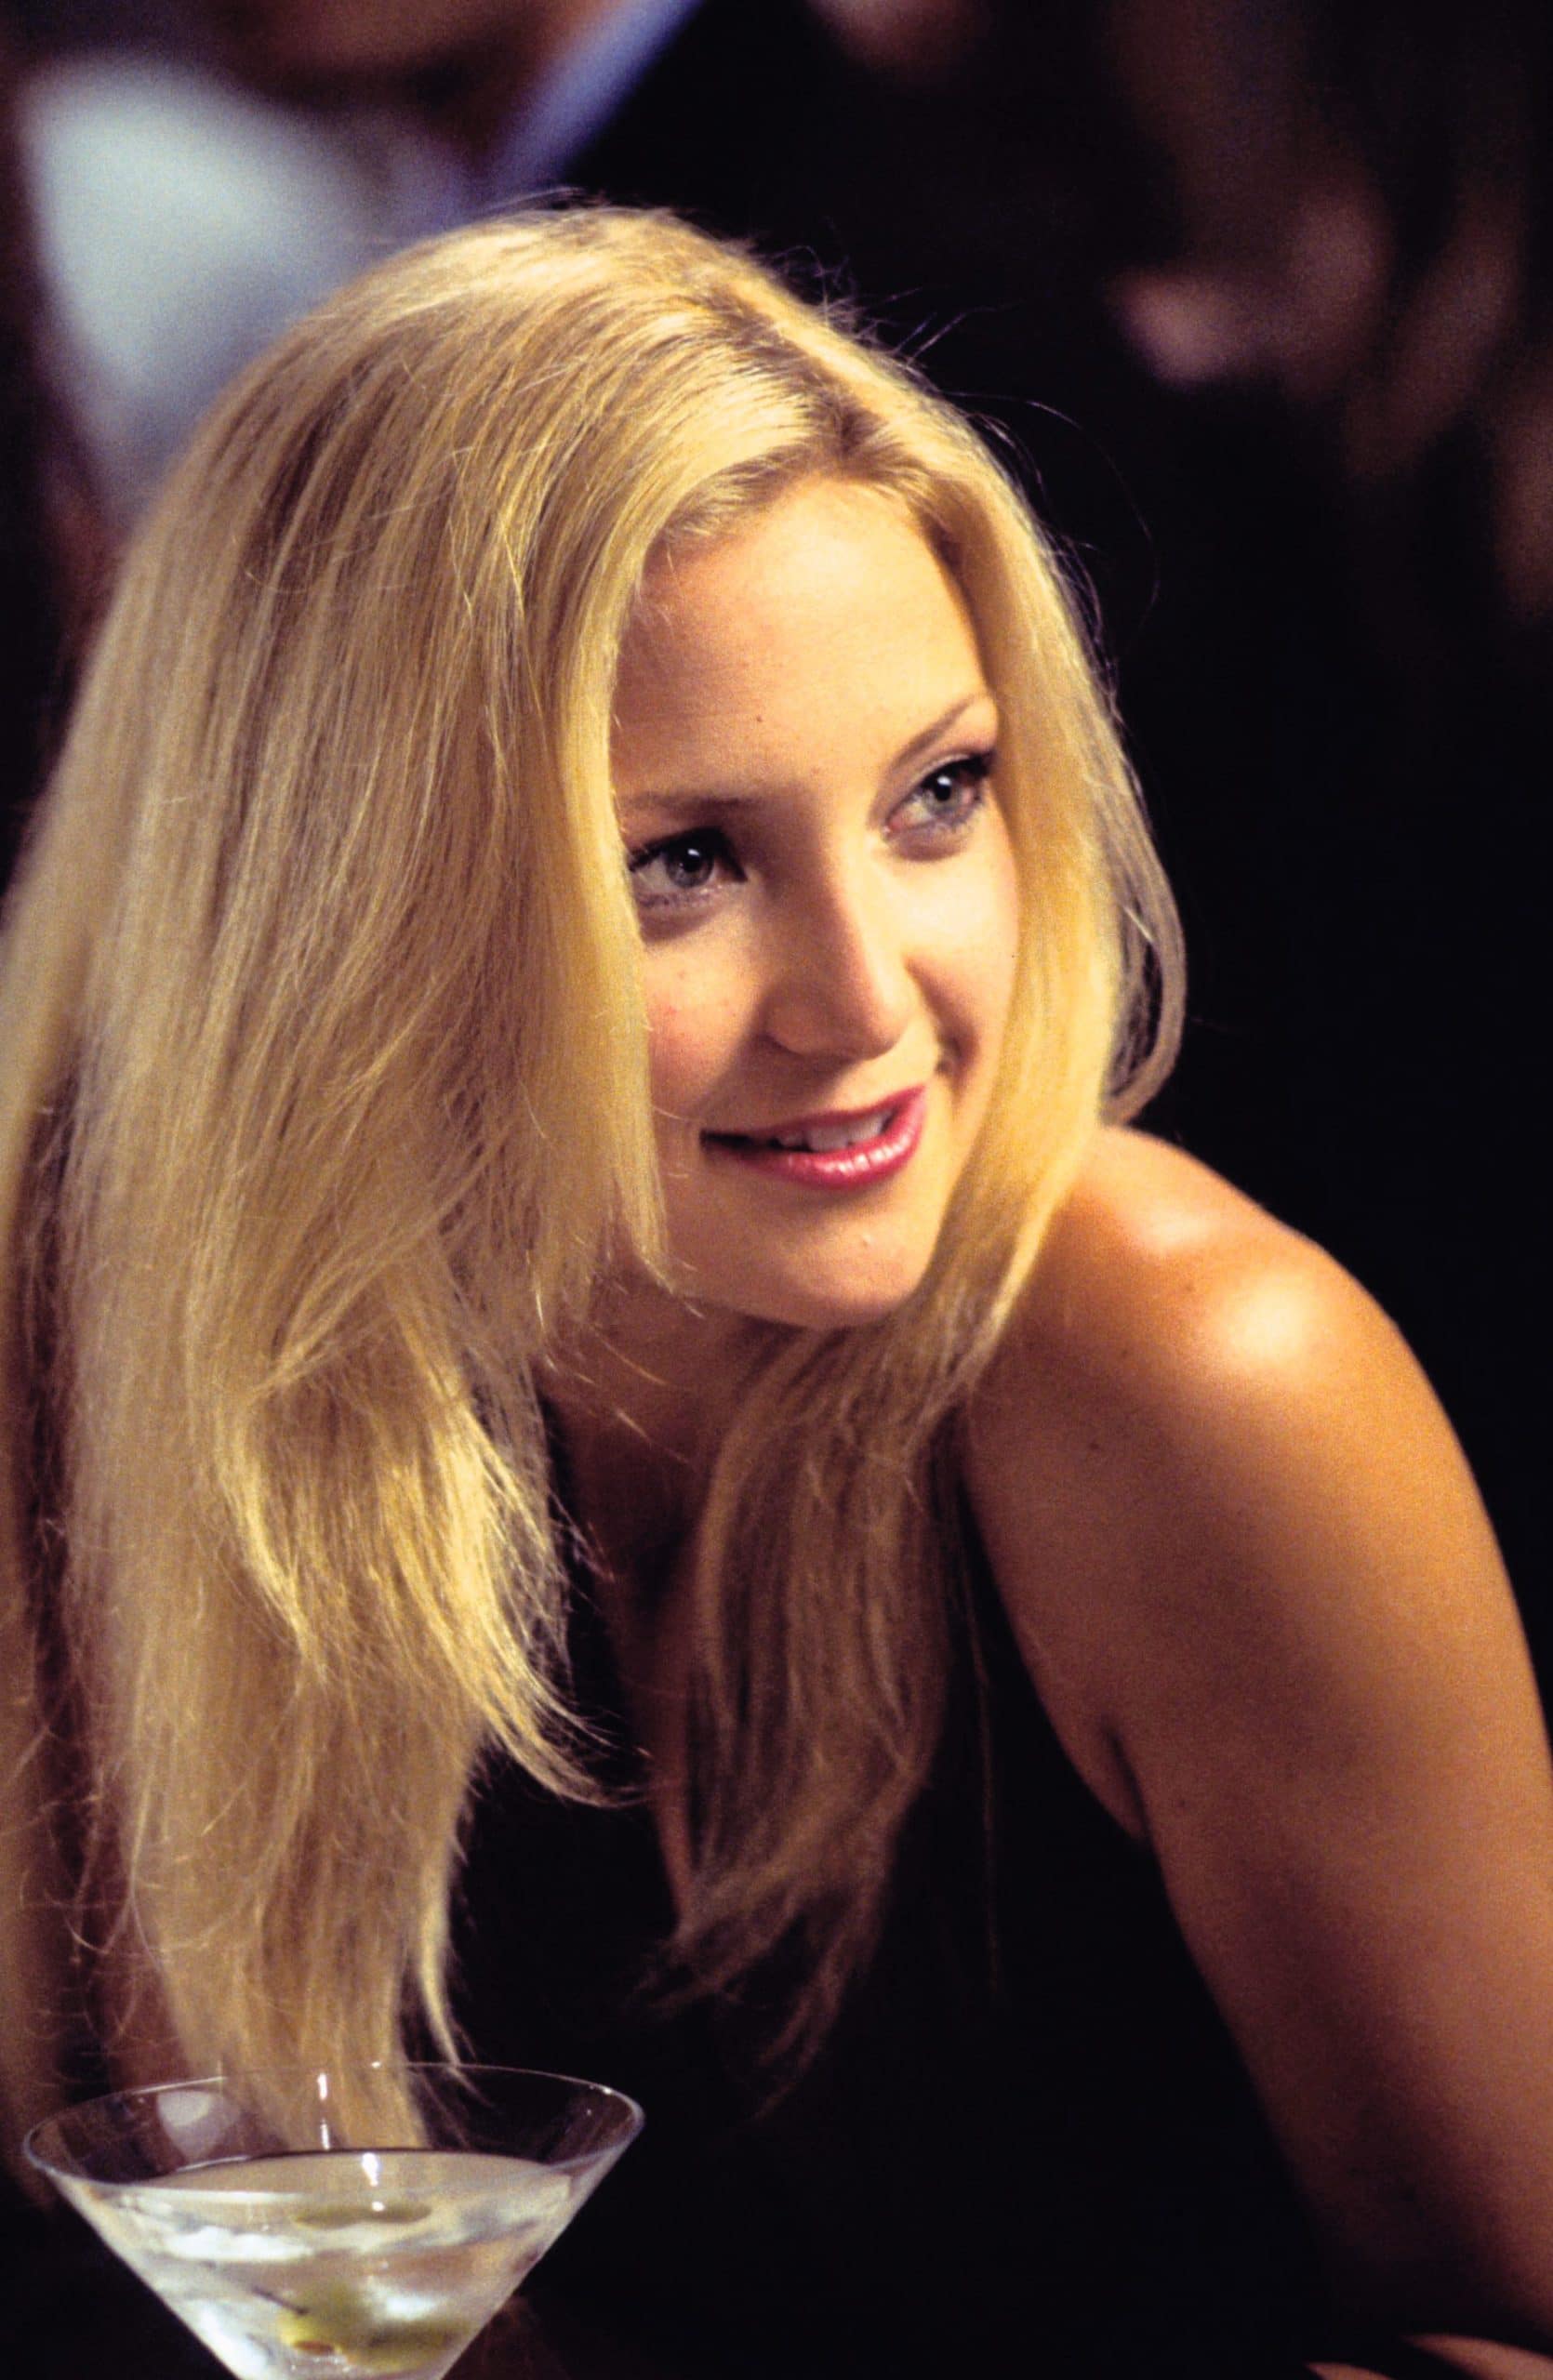 HOW TO LOSE A GUY IN 10 DAYS, Kate Hudson, 2003